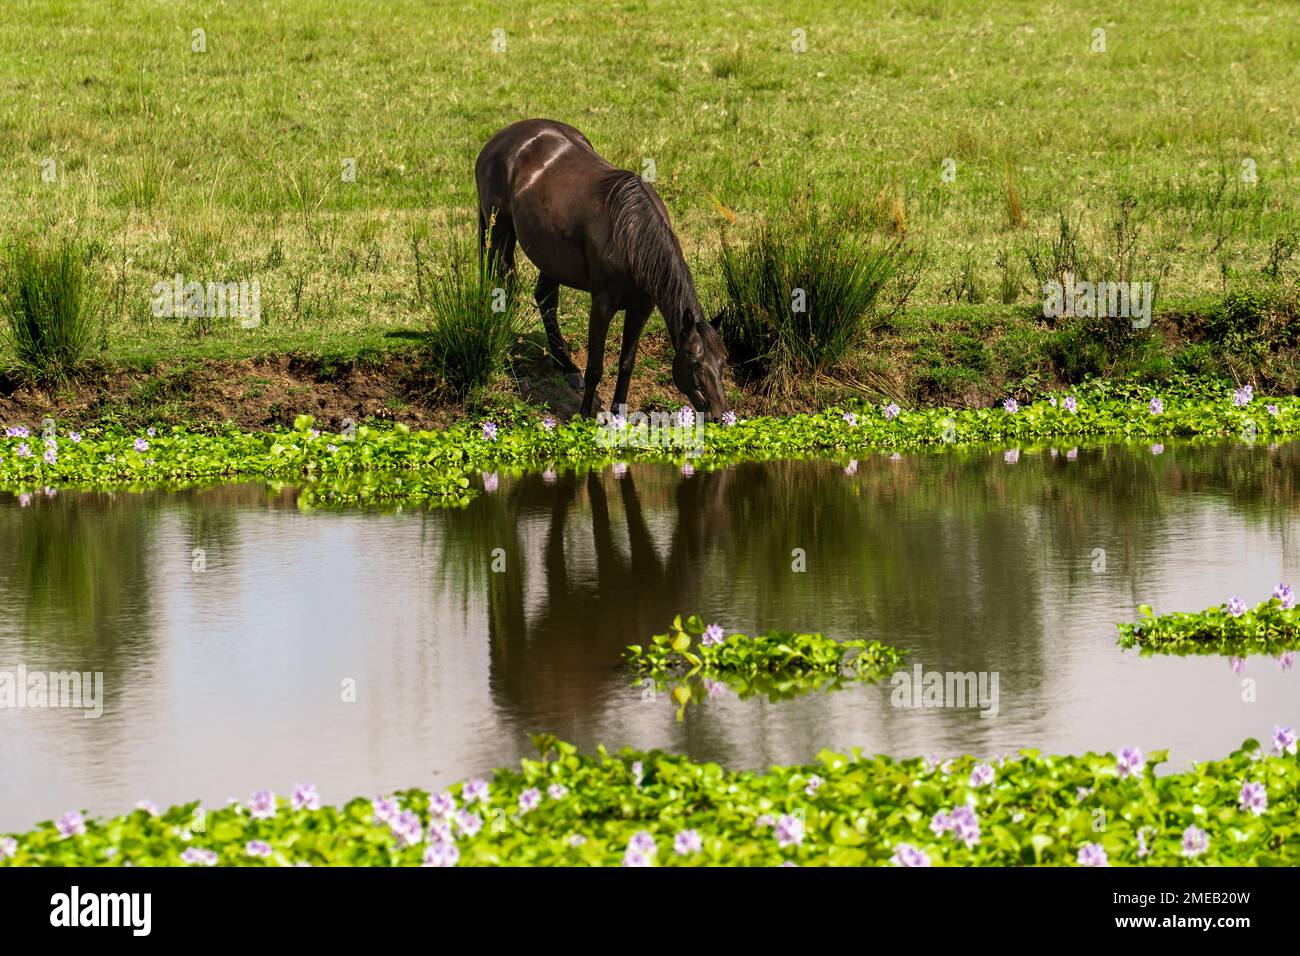 Landscape with dark brown horse reflected in a dam with water hyacinth growing on it. Stock Photo